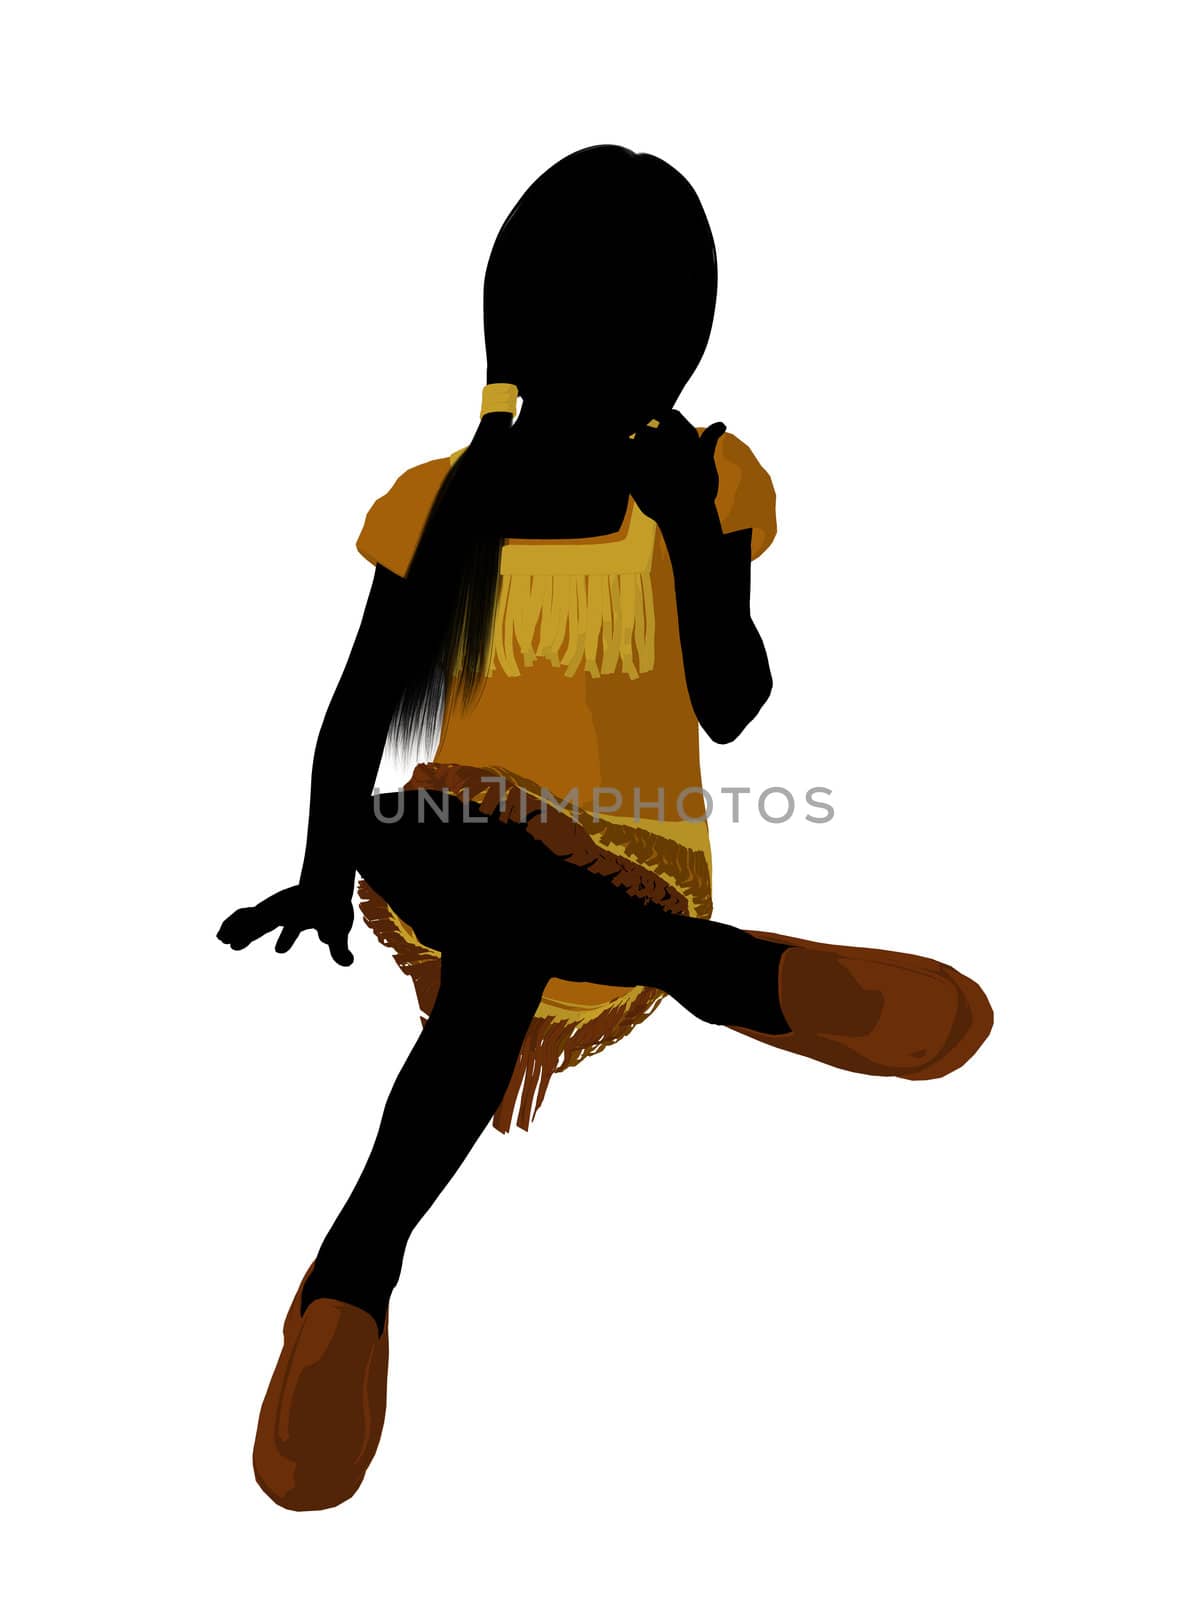 Native American Indian silhouette illustration on a white background